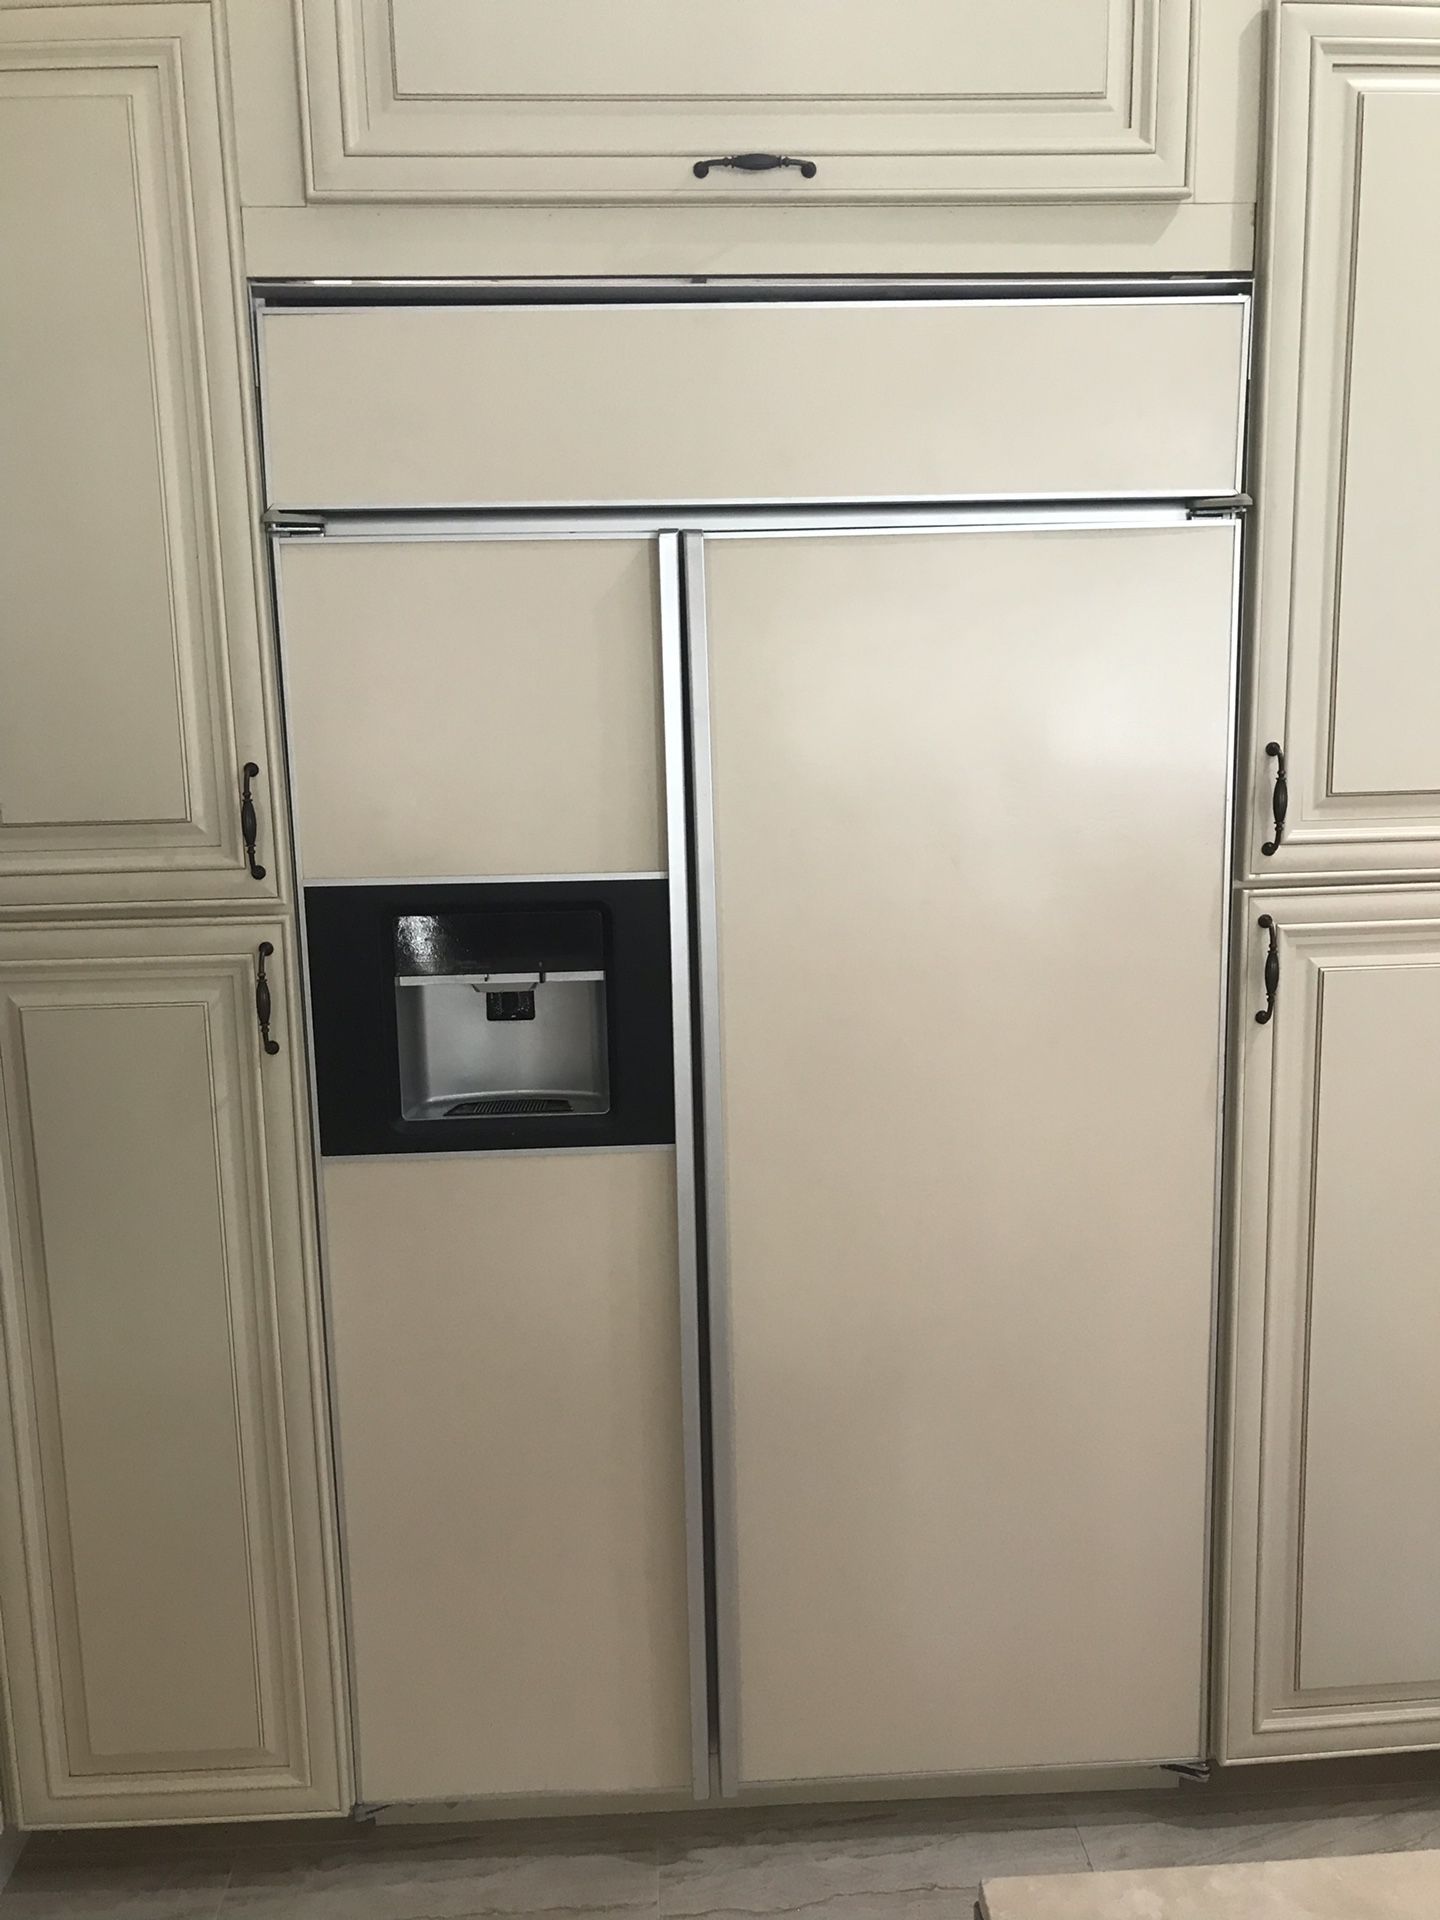 48” GE Monogram Refrigerator-Freezer w water and ice on the door all rebuilt by GE Technicians with GE parts work like new!